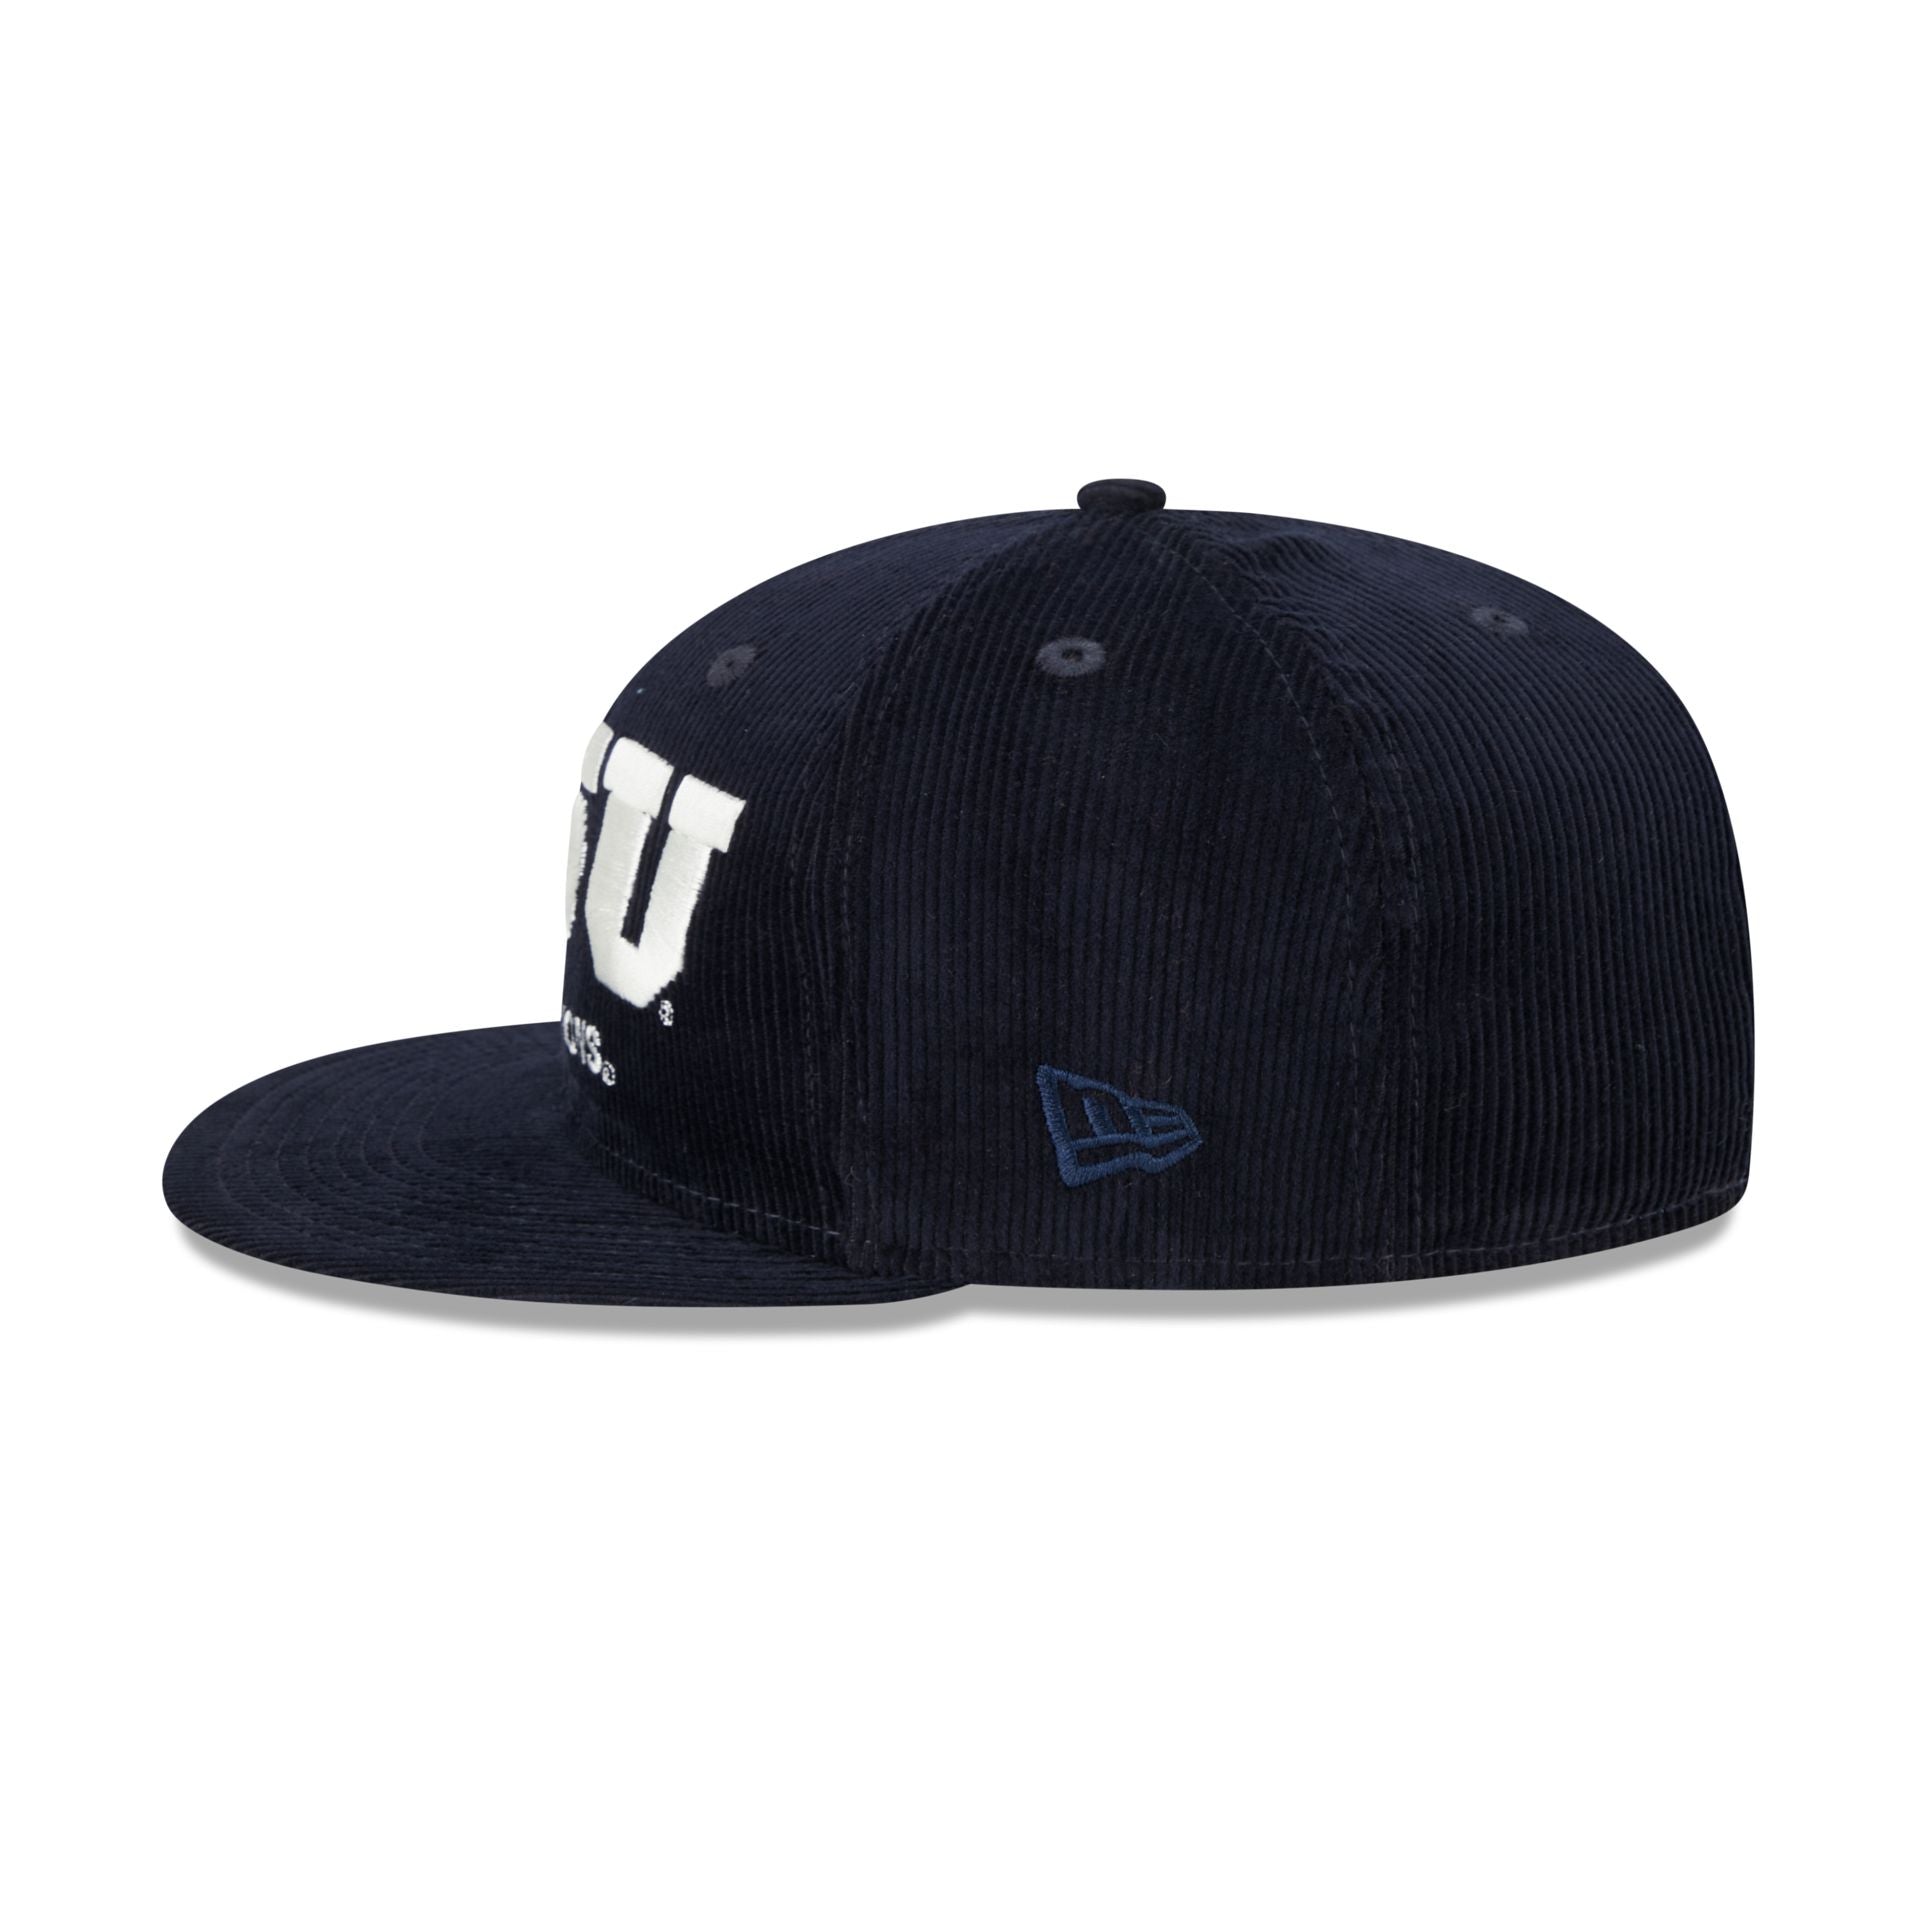 Penn State Nittany Lions Vintage 9FIFTY Snapback Hat – New Era Cap